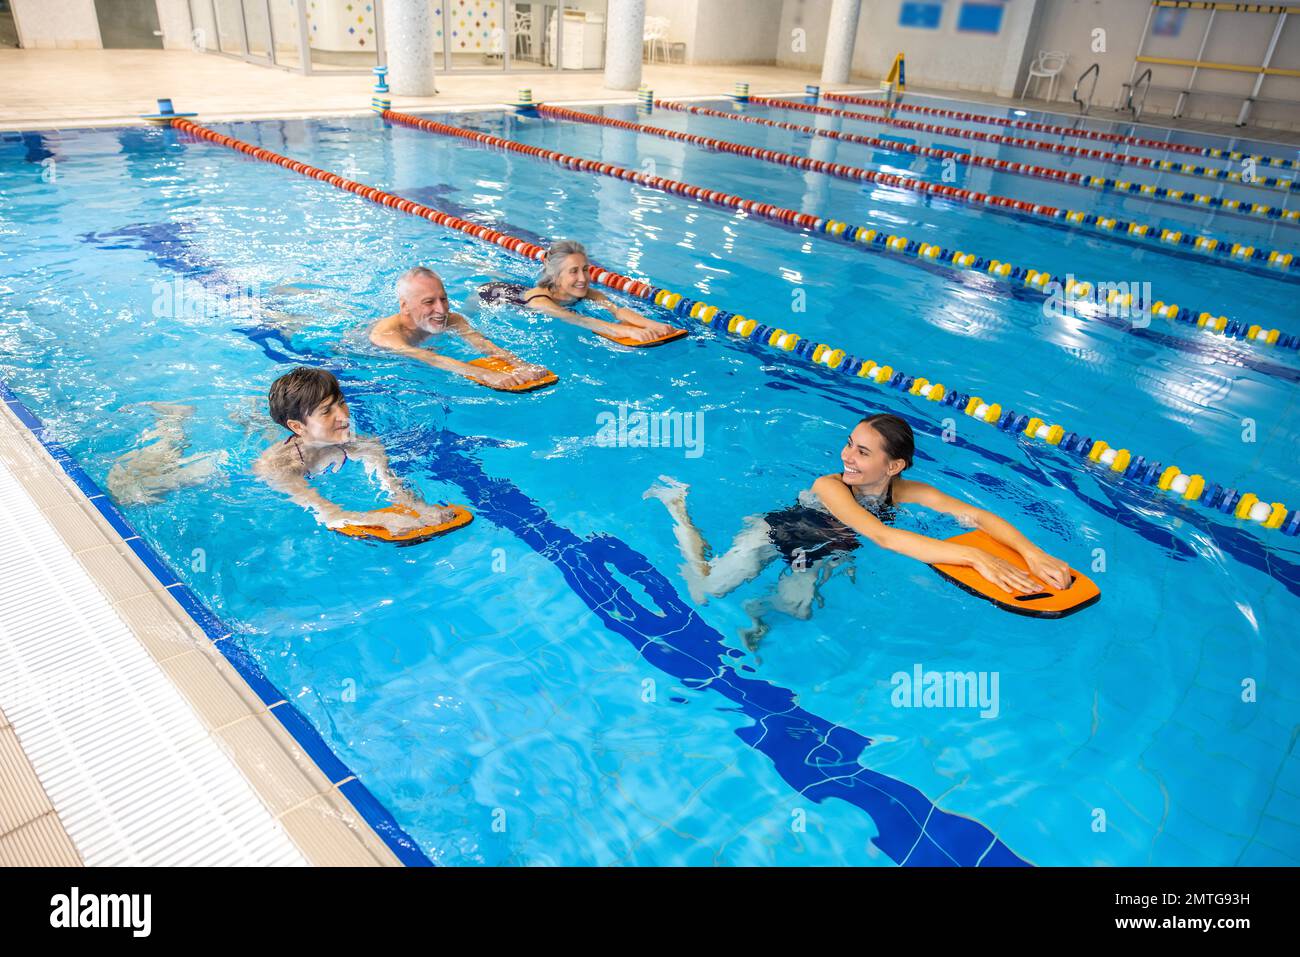 Group of people swimming in the swimming pool and looking enjoyed Stock Photo